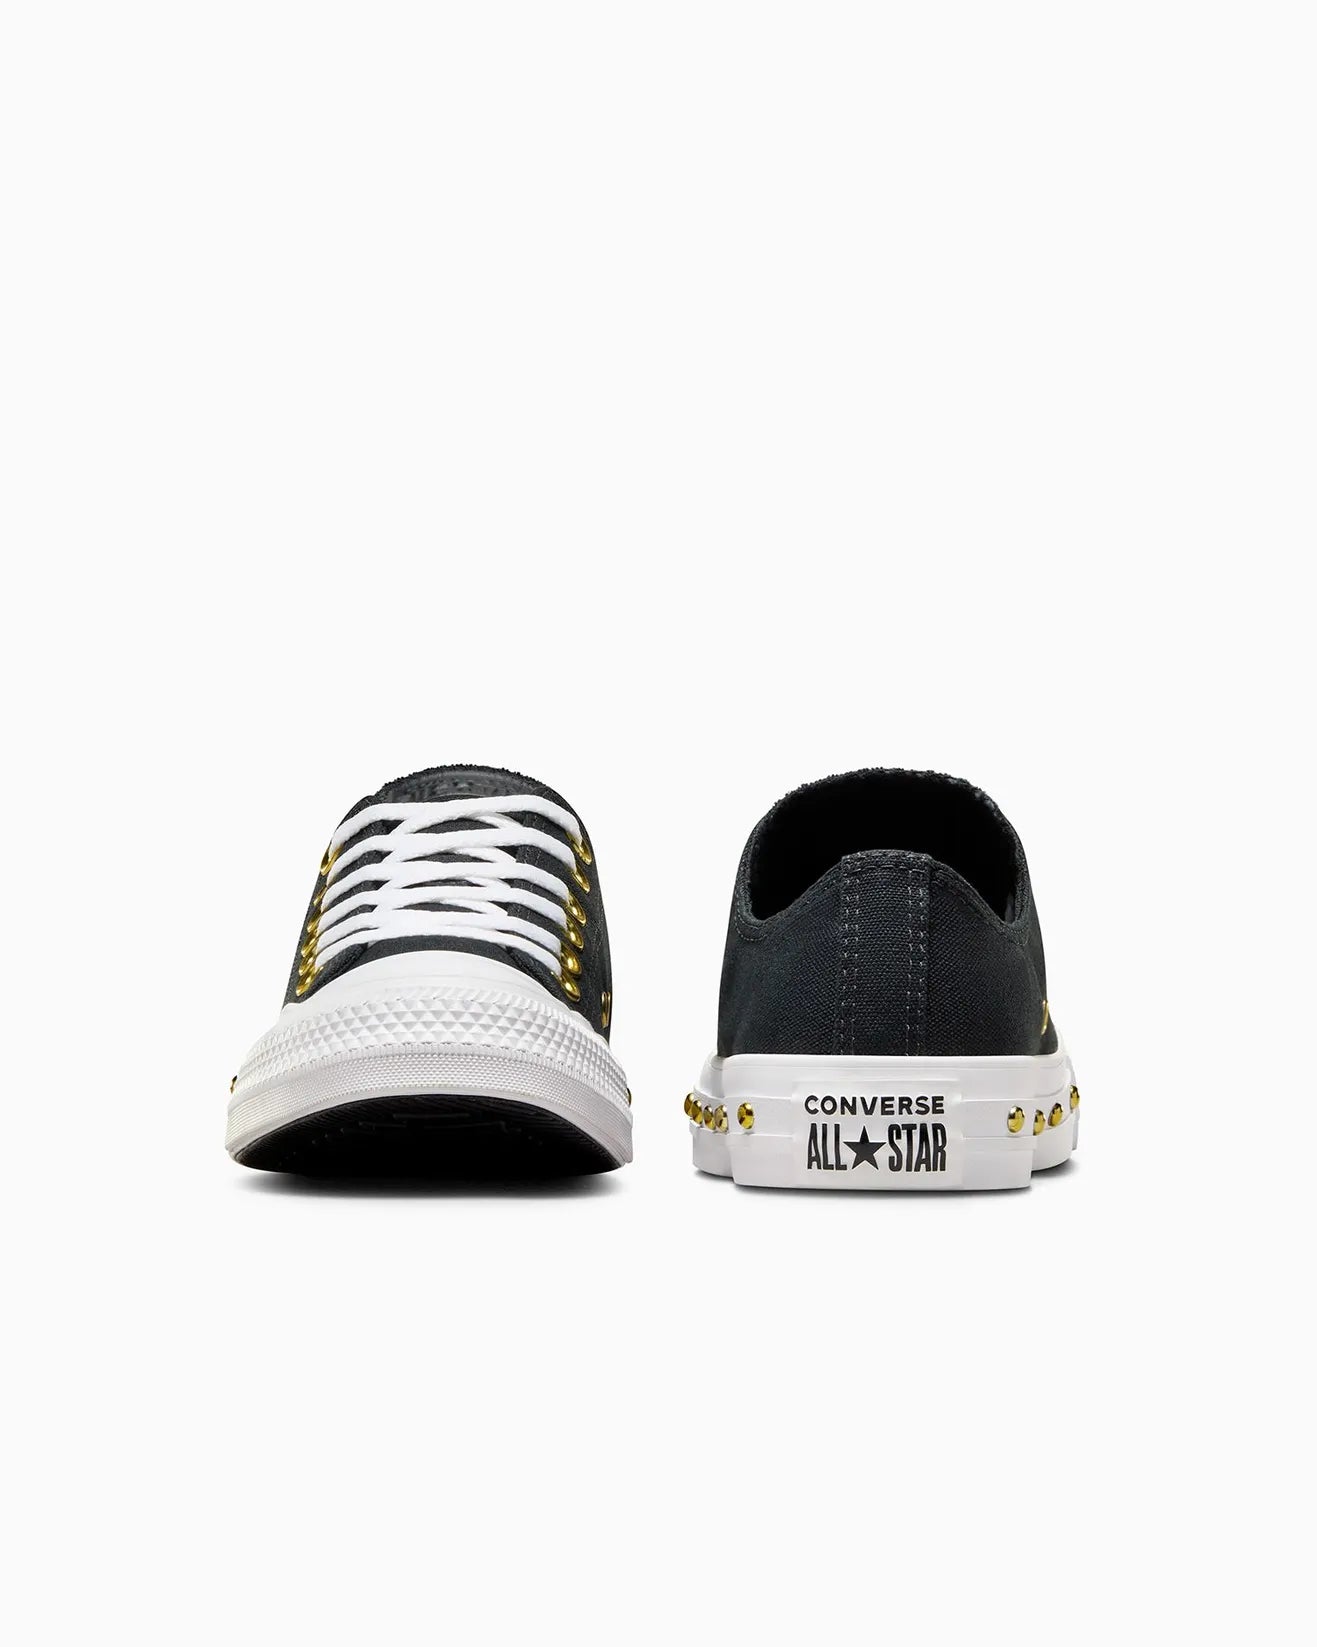 - Converse Chuck Taylor Womens Star Studded Lo -Black/White/Gold - (A07907) - OG- R1L7